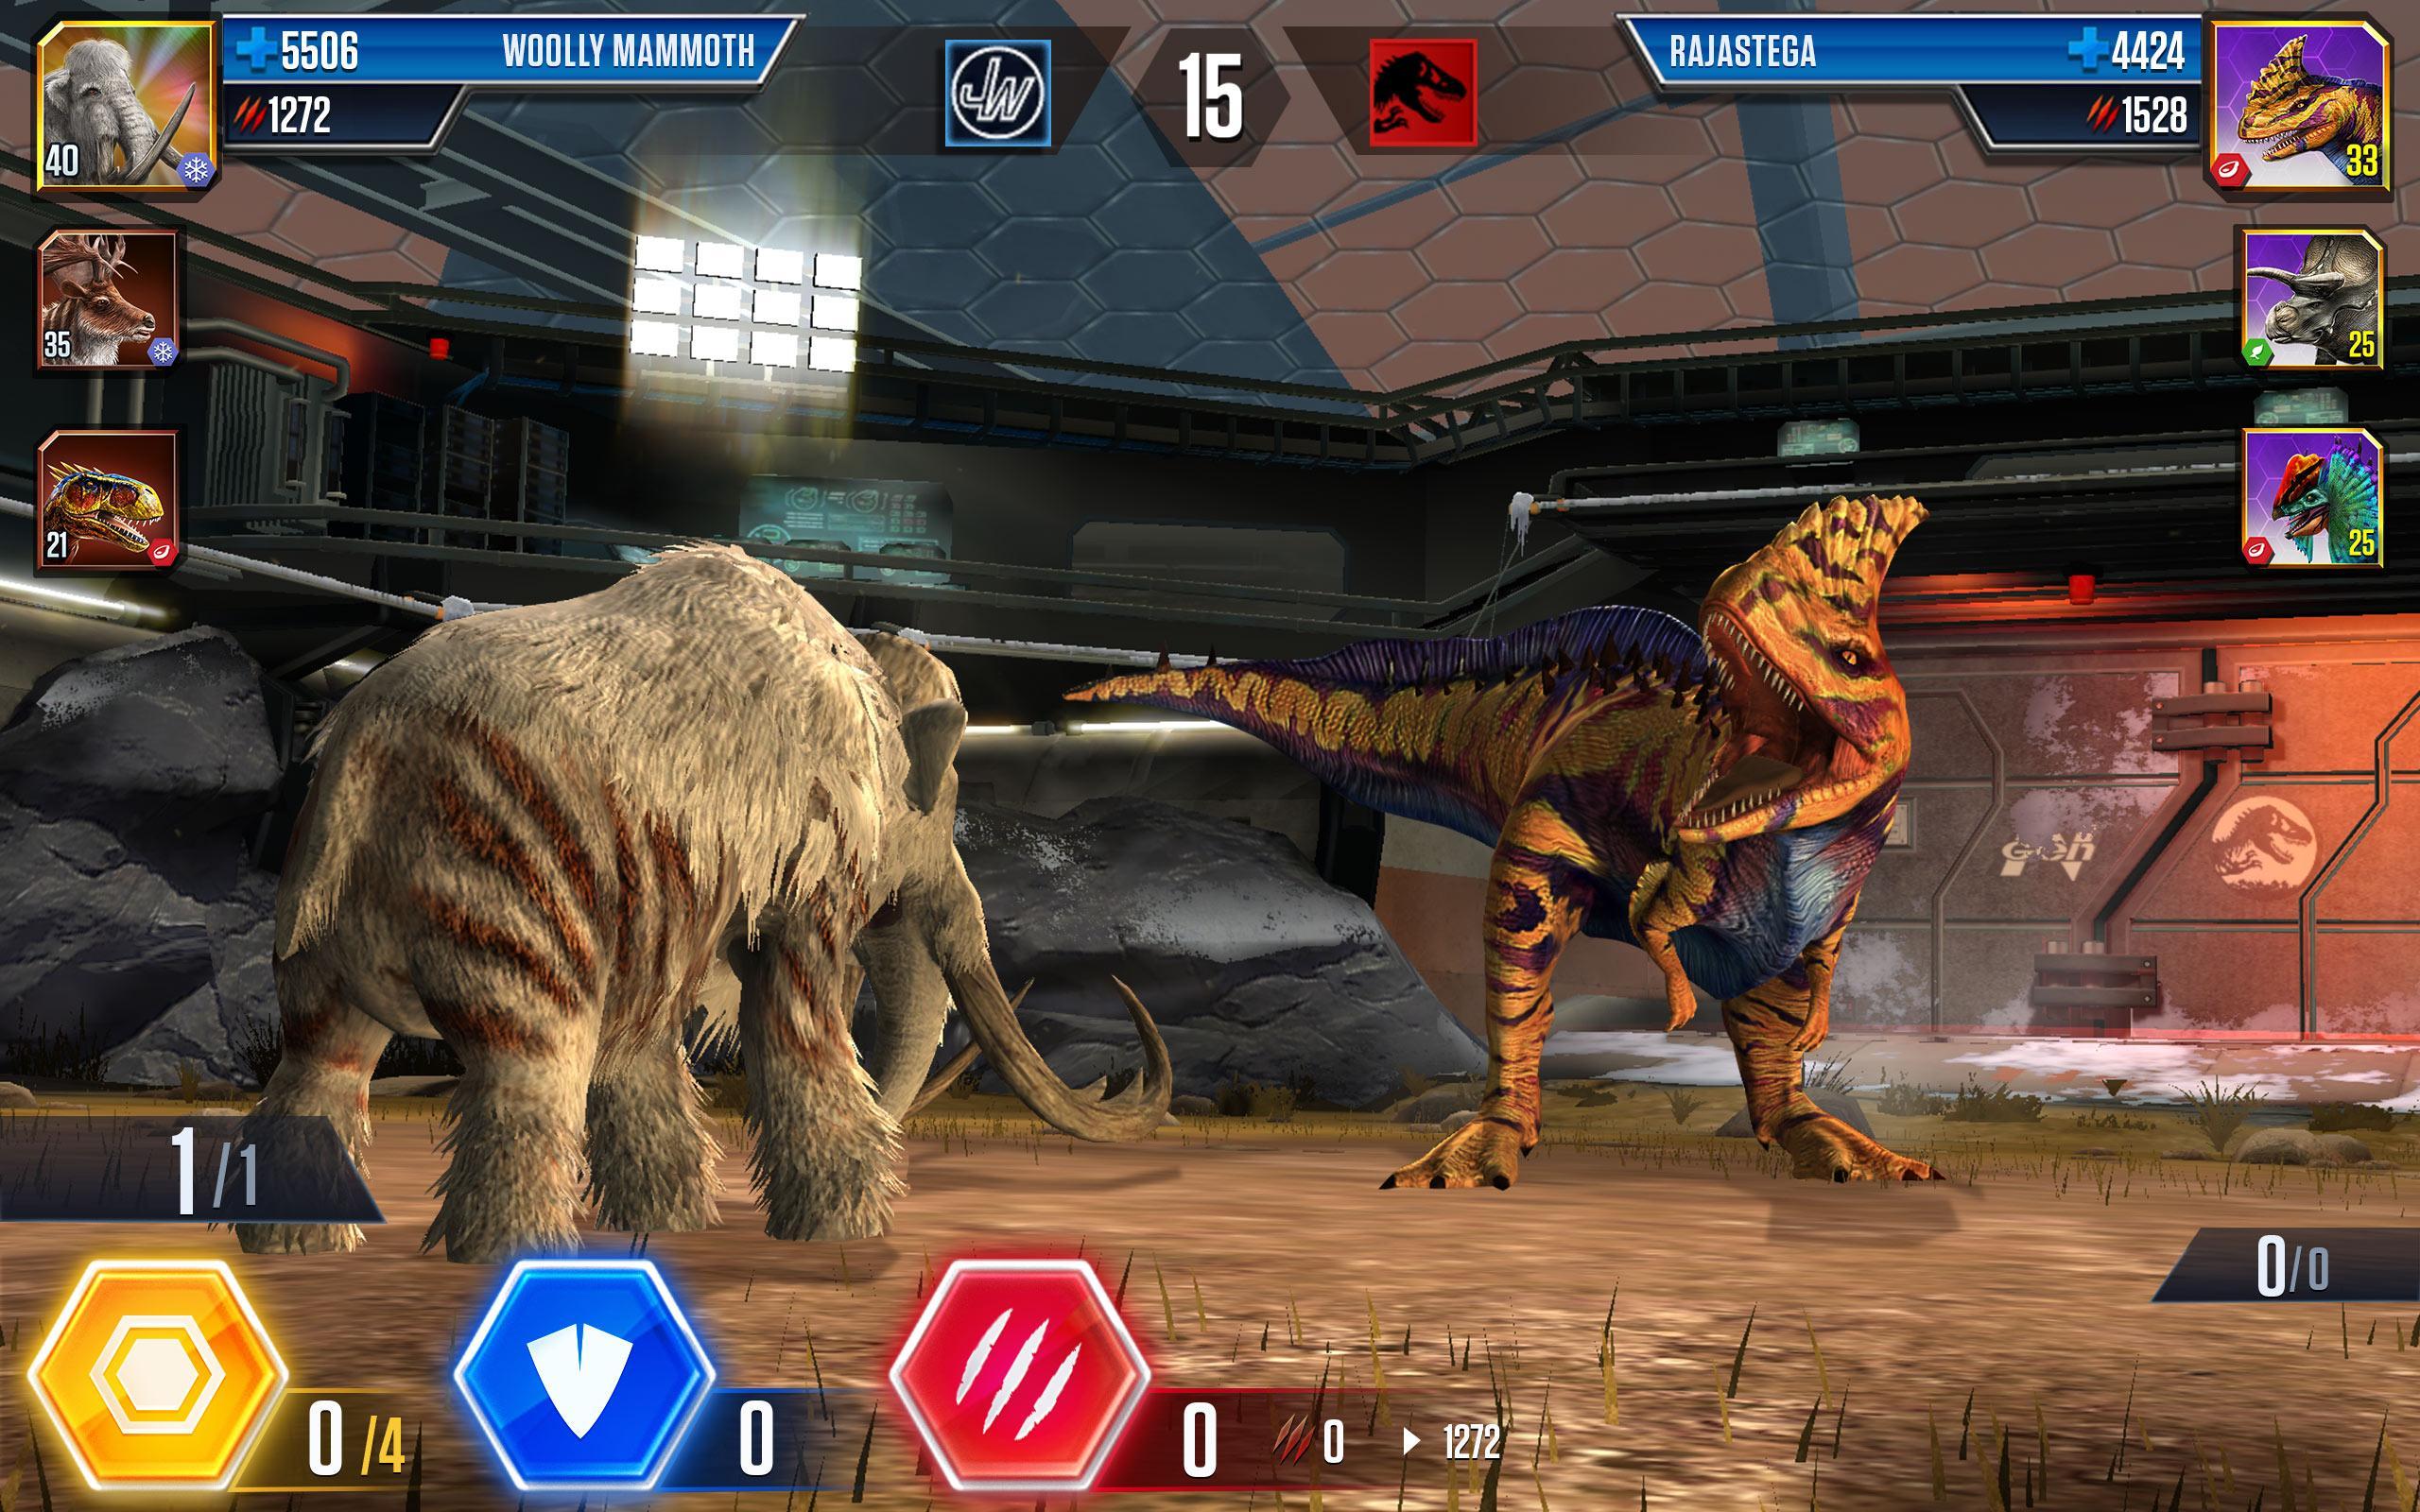 Jurassic Worldâ„¢: The Game for Android - APK Download - 